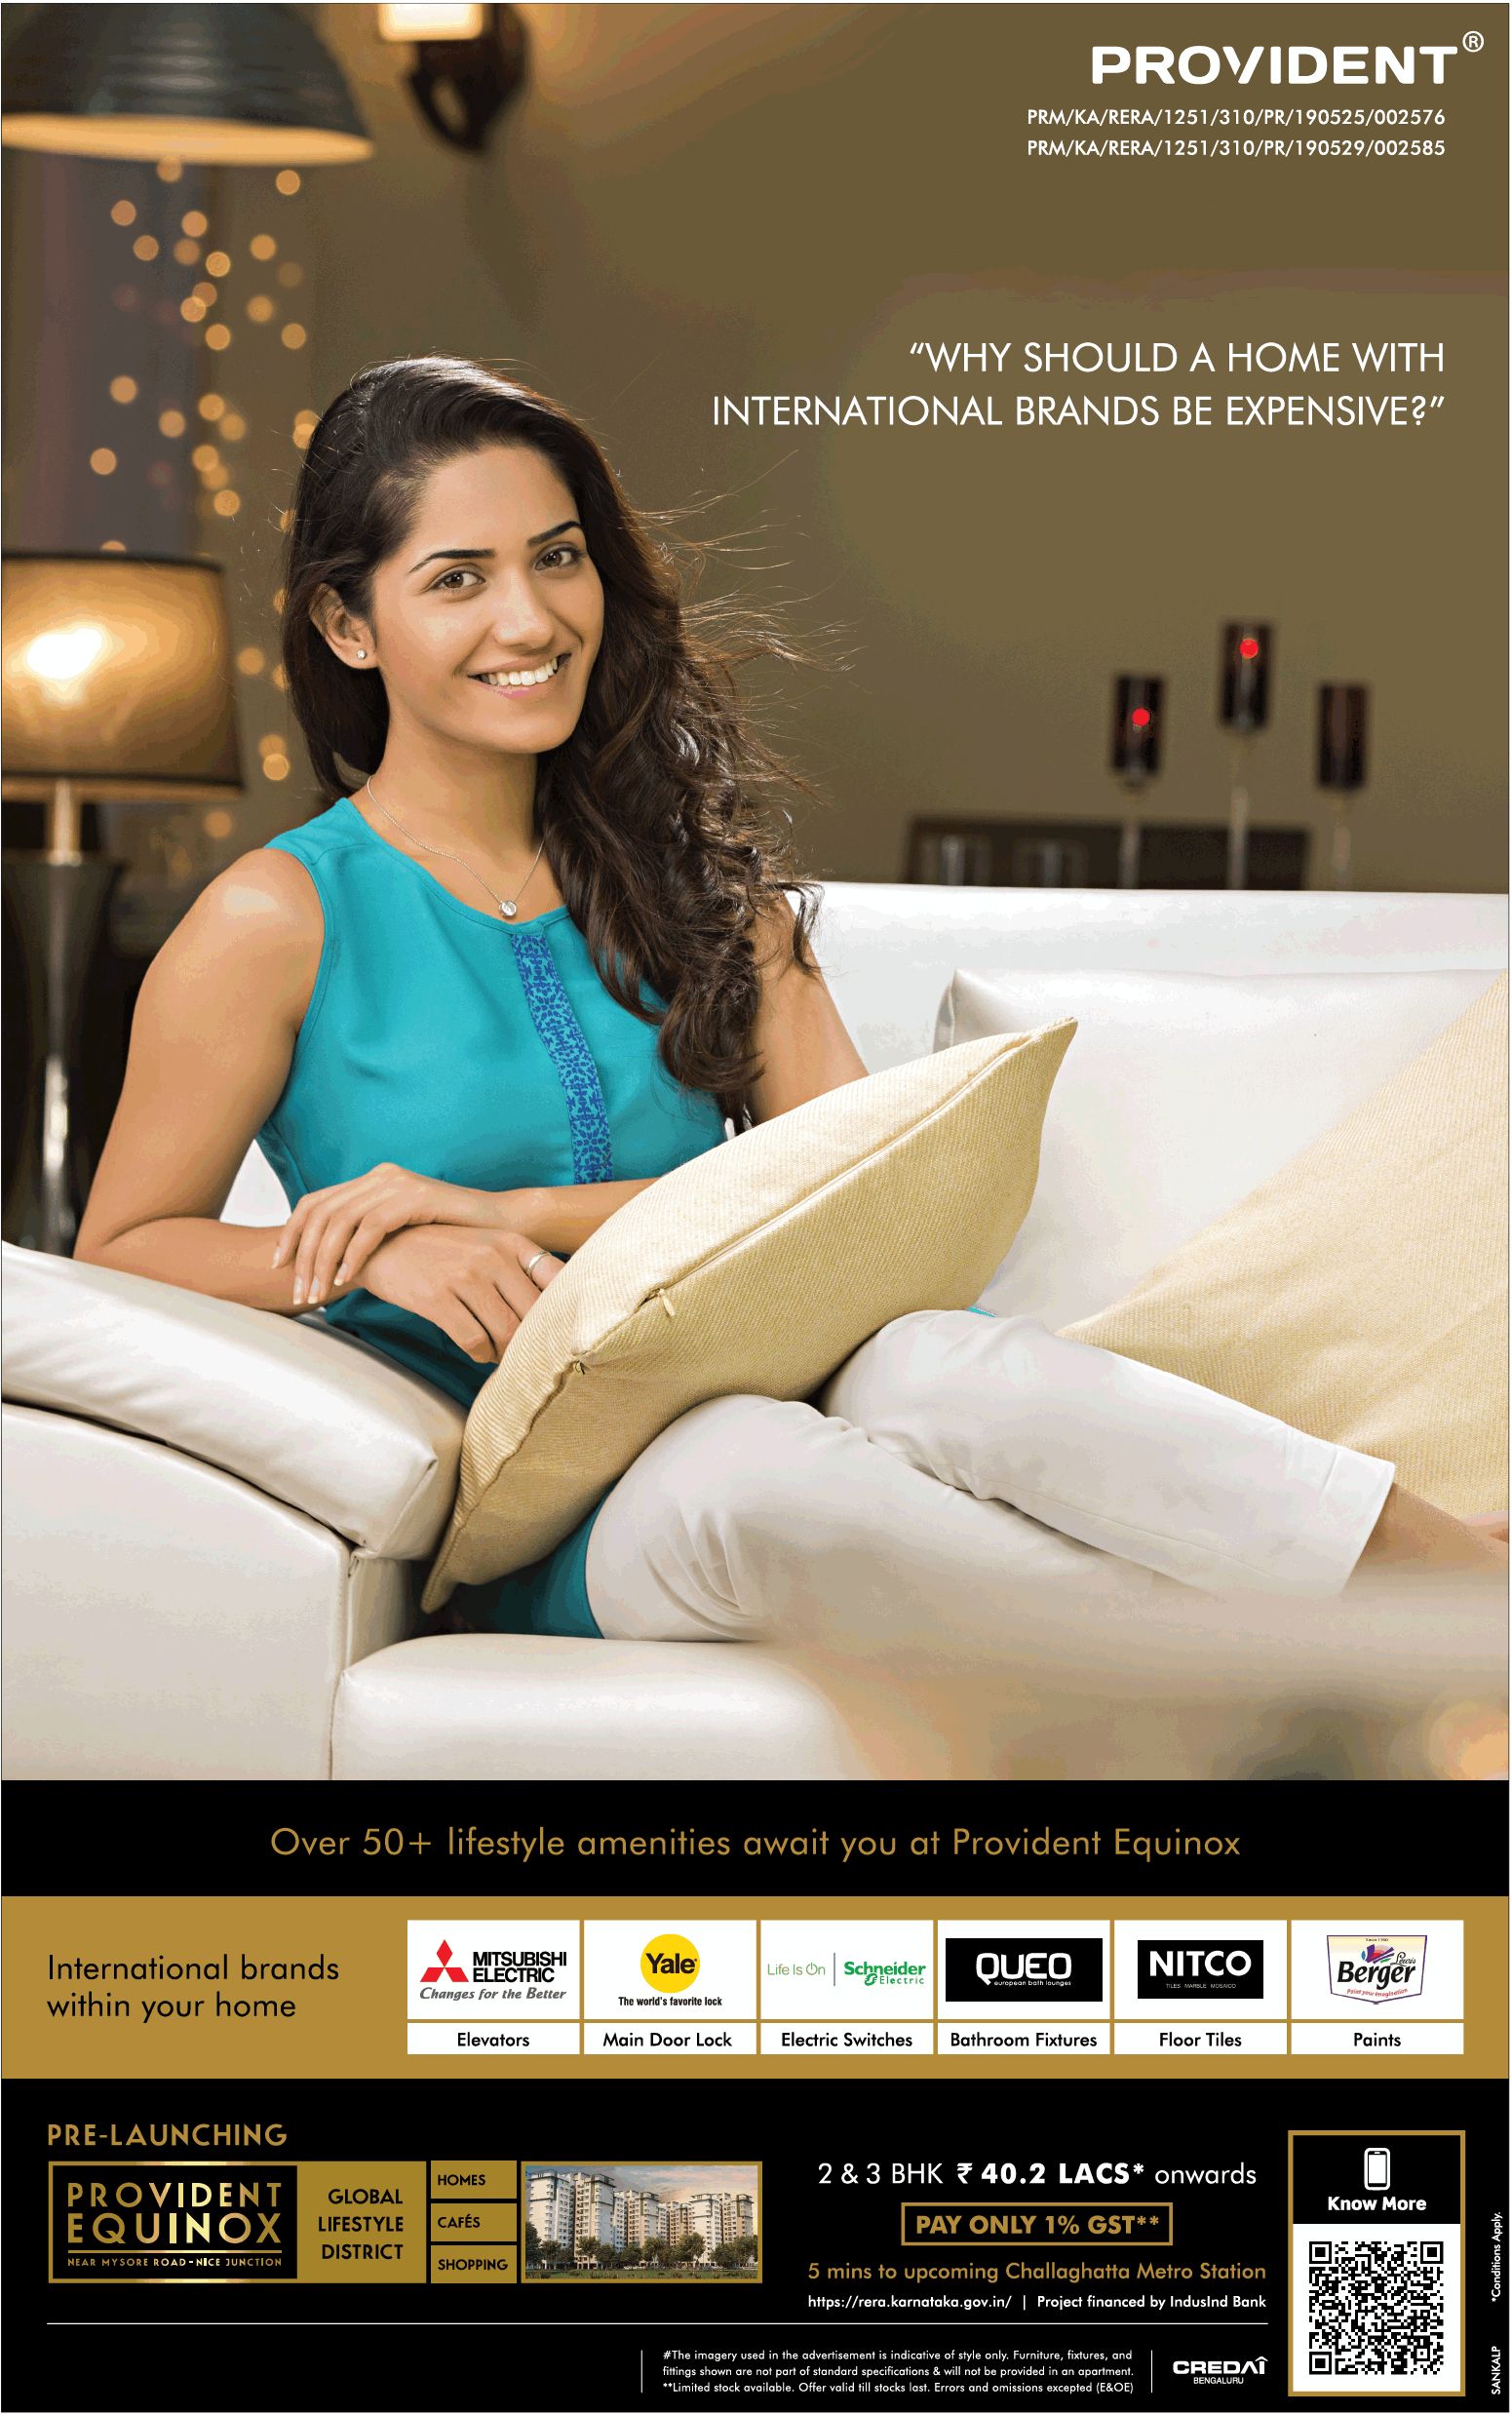 Over 50+ lifestyle amenities await you at Provident Equinox in Bangalore Update